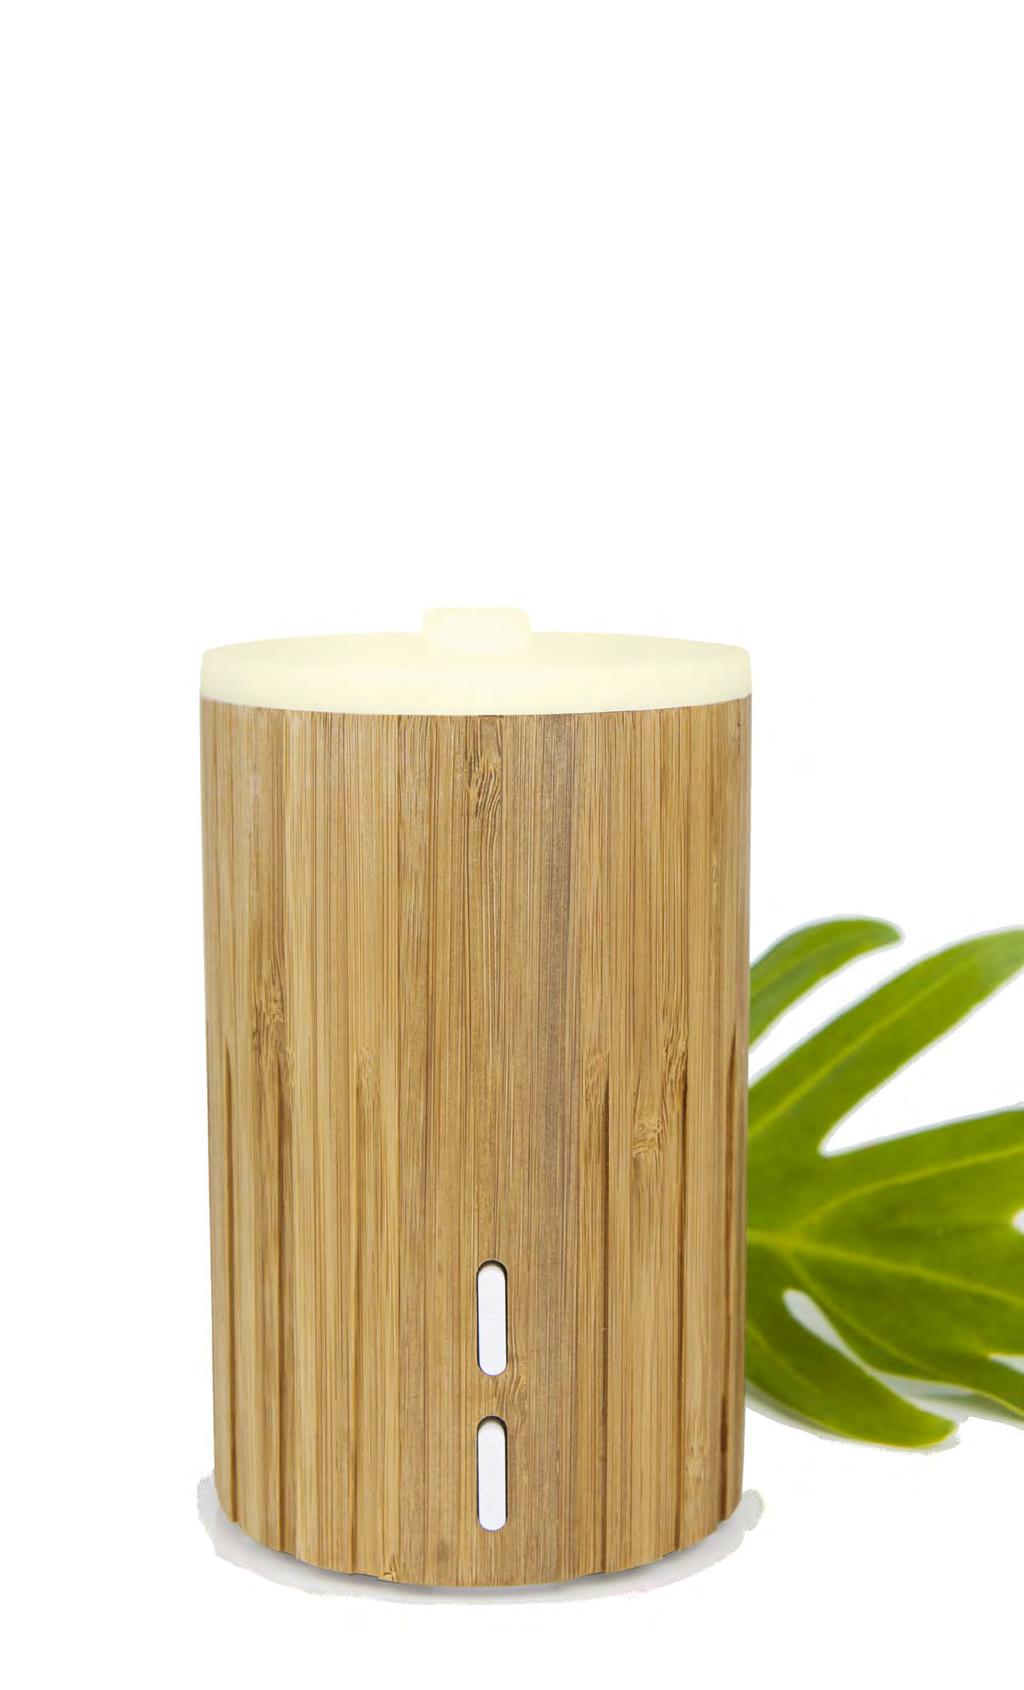 Aroma-O mm Bamboo Diffuser The Aroma-O'mm ultrasonic diffuser is created with 'real bamboo'. It is perfect for anyone seeking a 'natural eco' feel whilst diffusing essential oils.